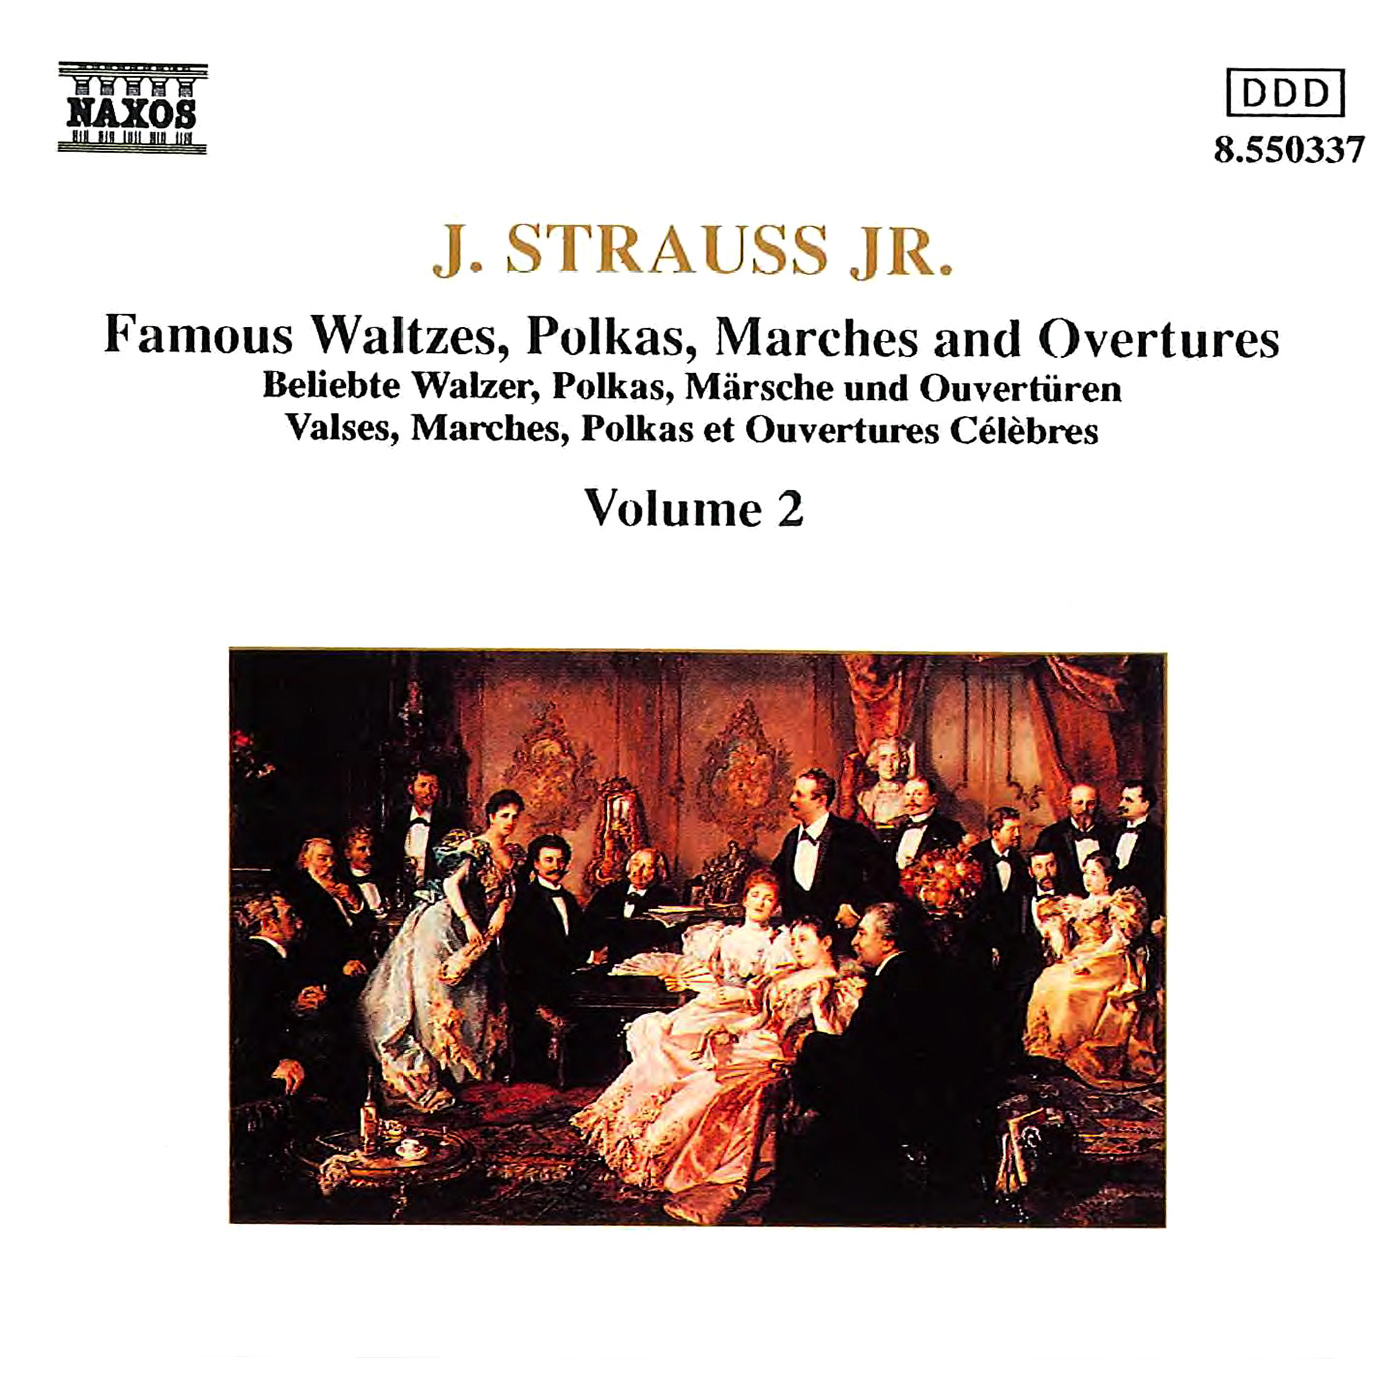 STRAUSS II, J.: Waltzes, Polkas, Marches and Overtures, Vol.  2